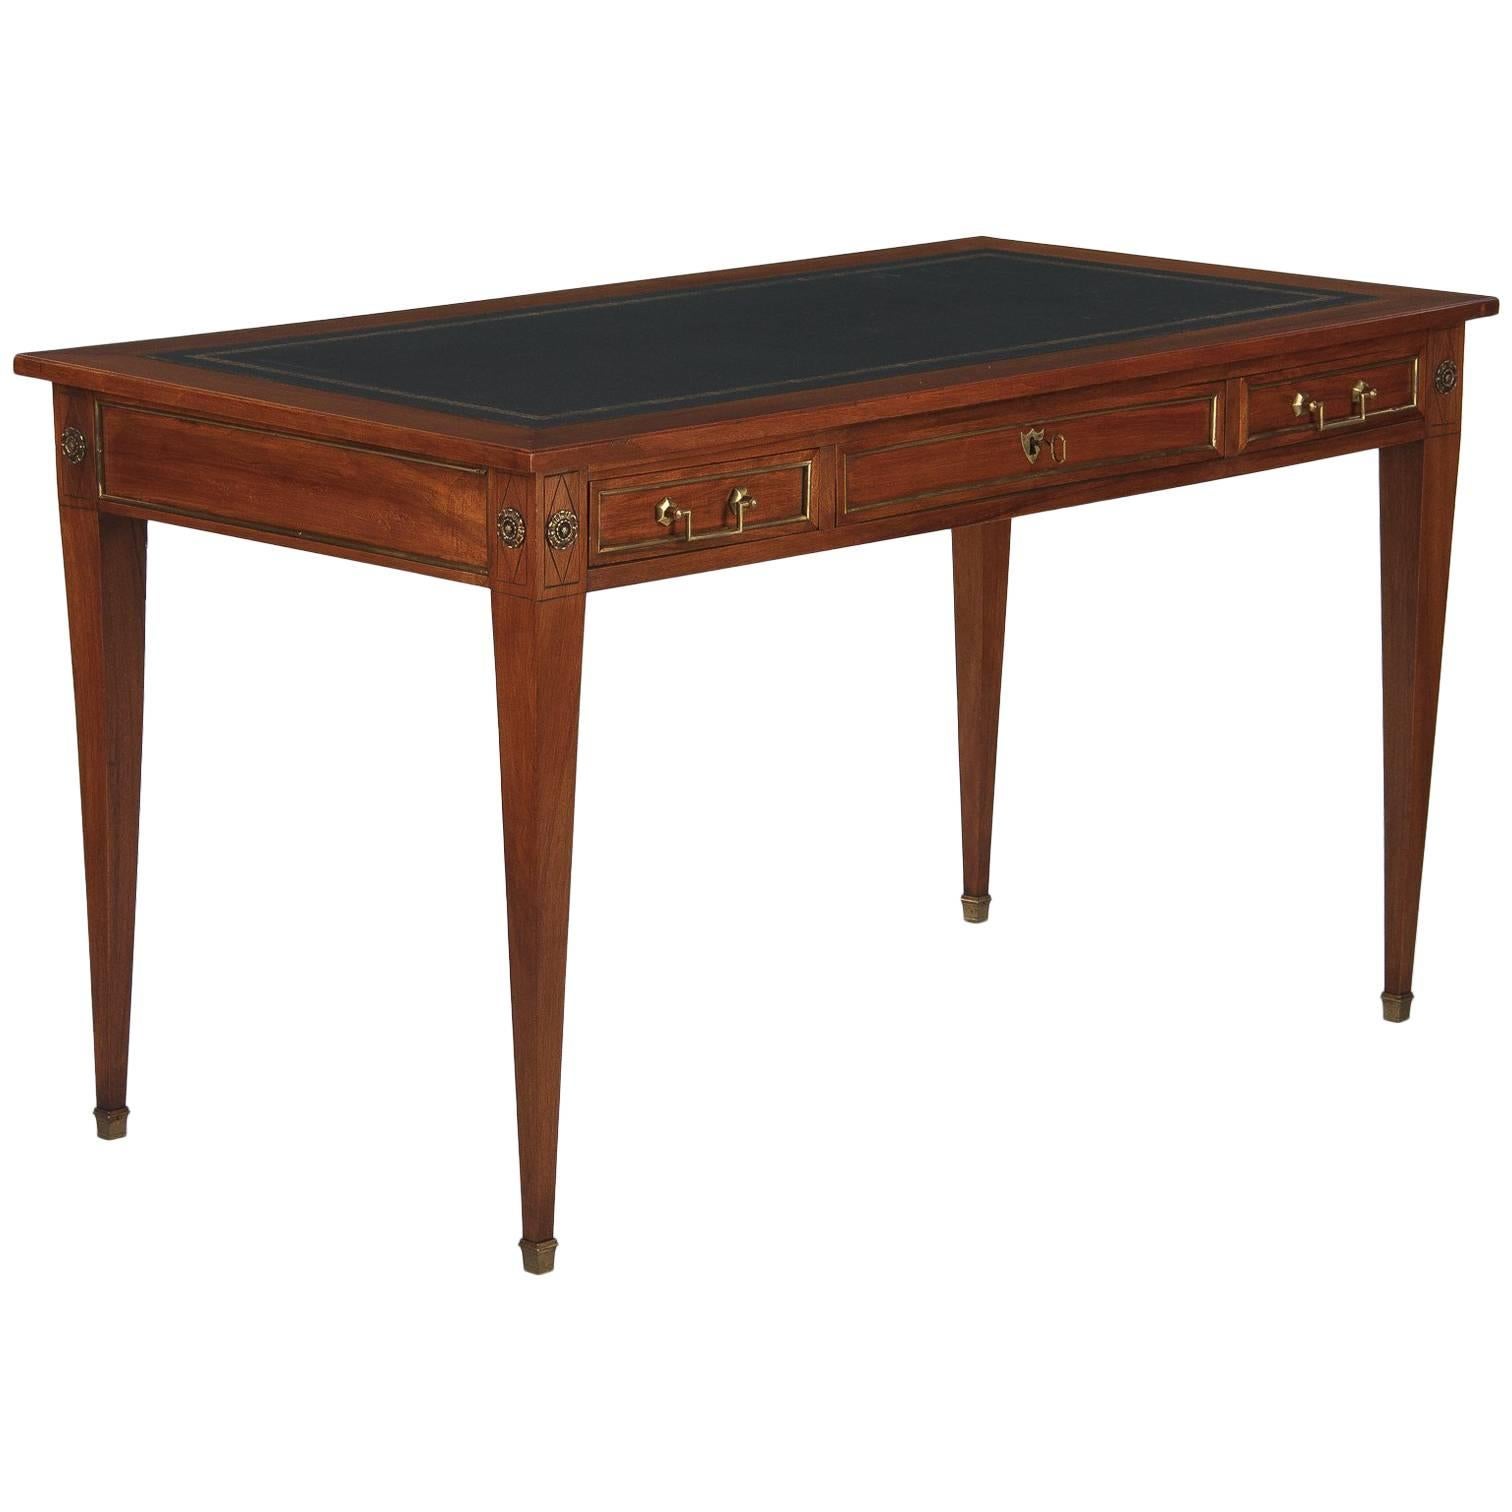 French Directoire Style Cherrywood Desk with Leather Top, Early 1900s